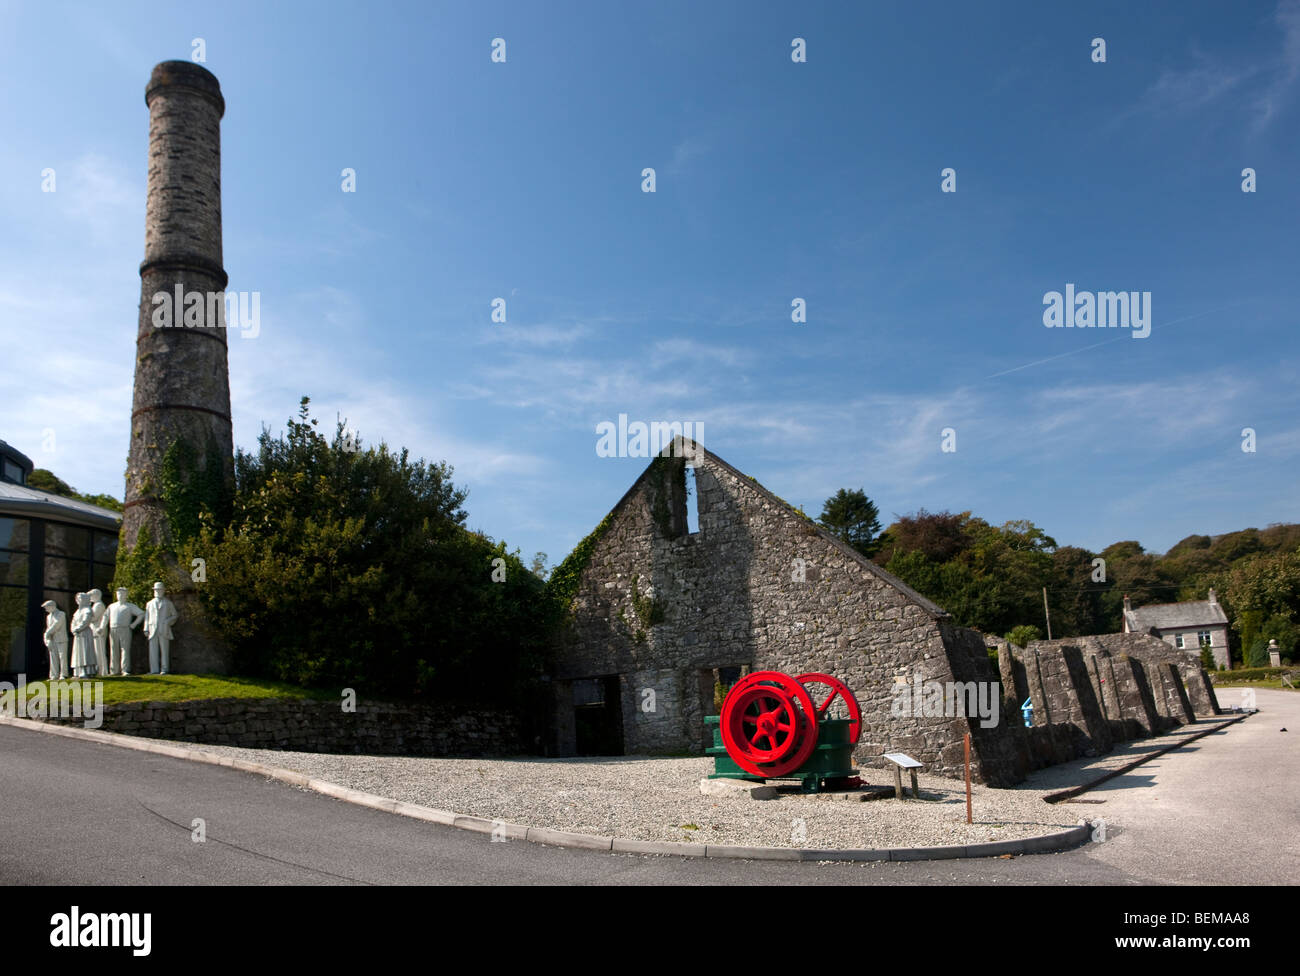 China clay industry heritage centre near St Austell, Cornwall, UK Stock Photo